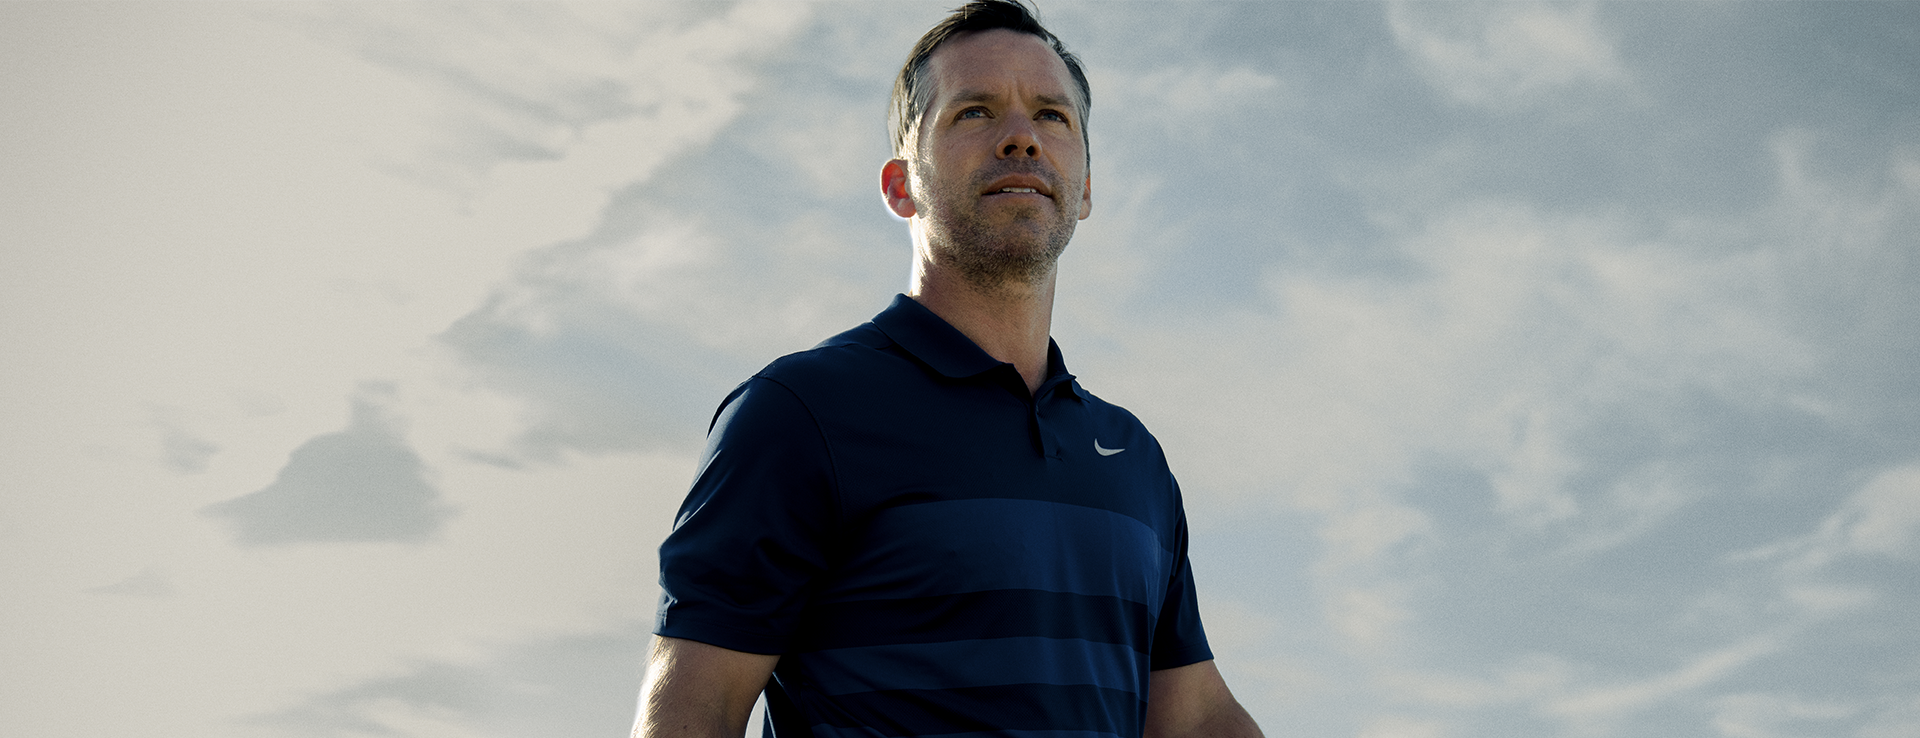 Paul Casey is standing in front of clouds while he looks up into the sky. We see him frontal from a low angle.